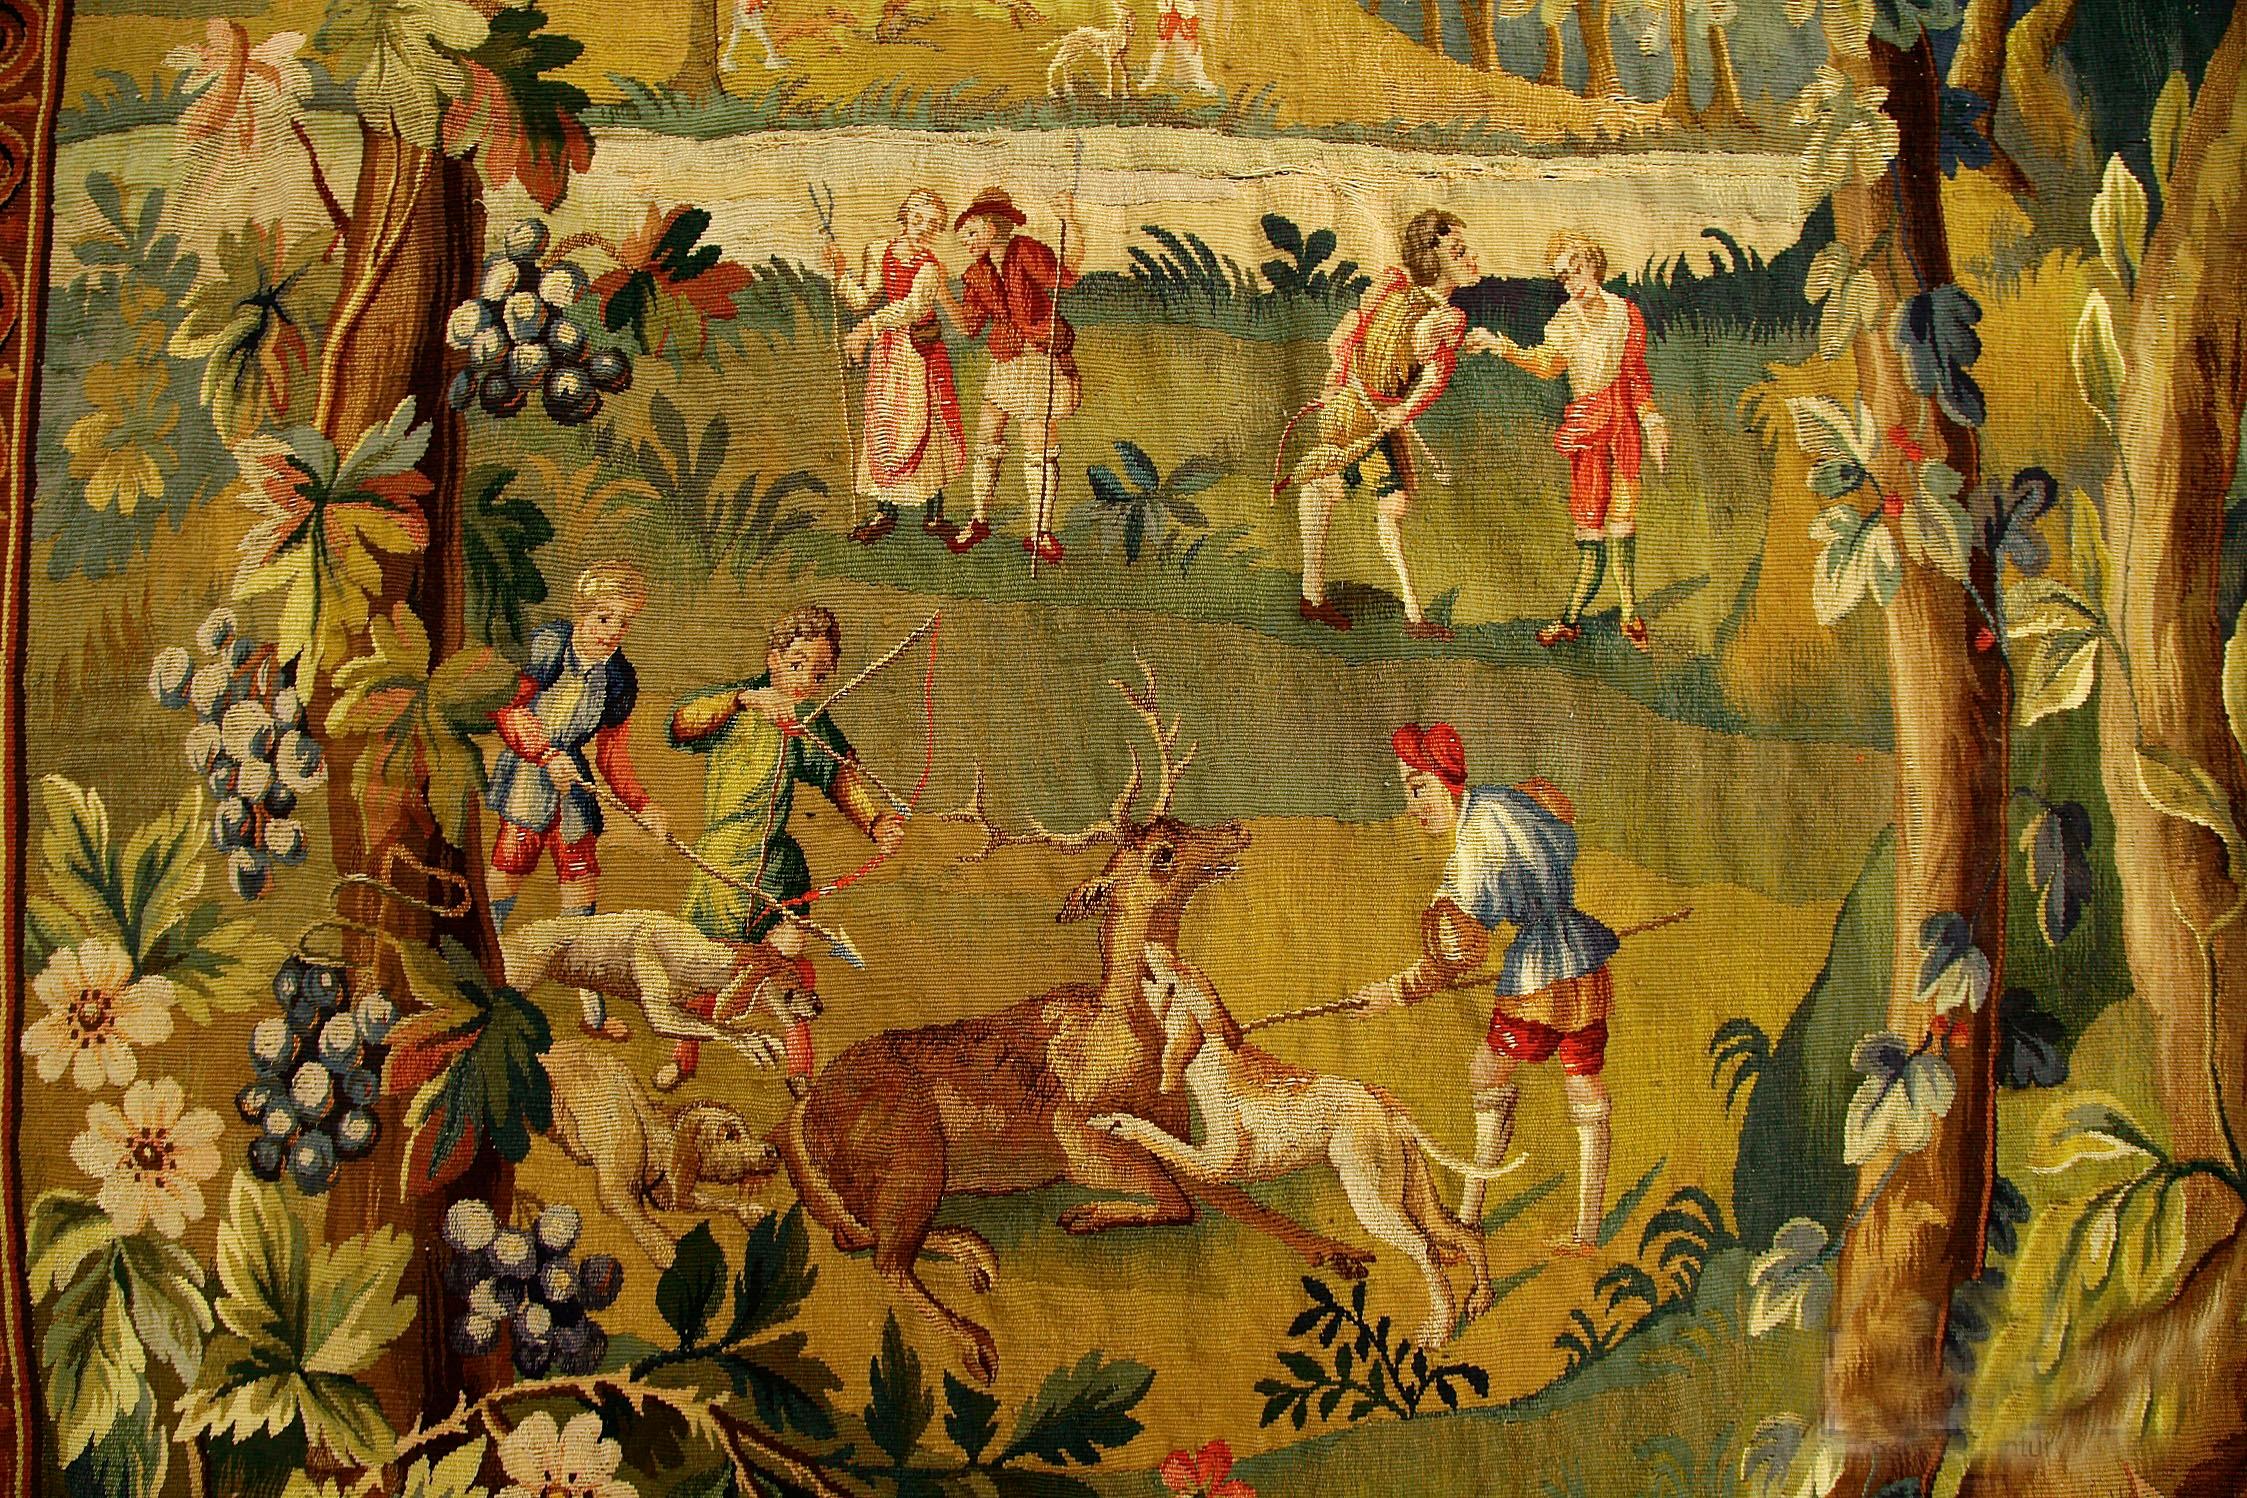 Antique English Soho Tapestry Circa 1900  6'7 x 6'7 depicting a hunting scene. The tapestry is filled with detailed depictions of hunters on horse back both men and women, colorful birds and trees with floral interspersed all in intricate detail.